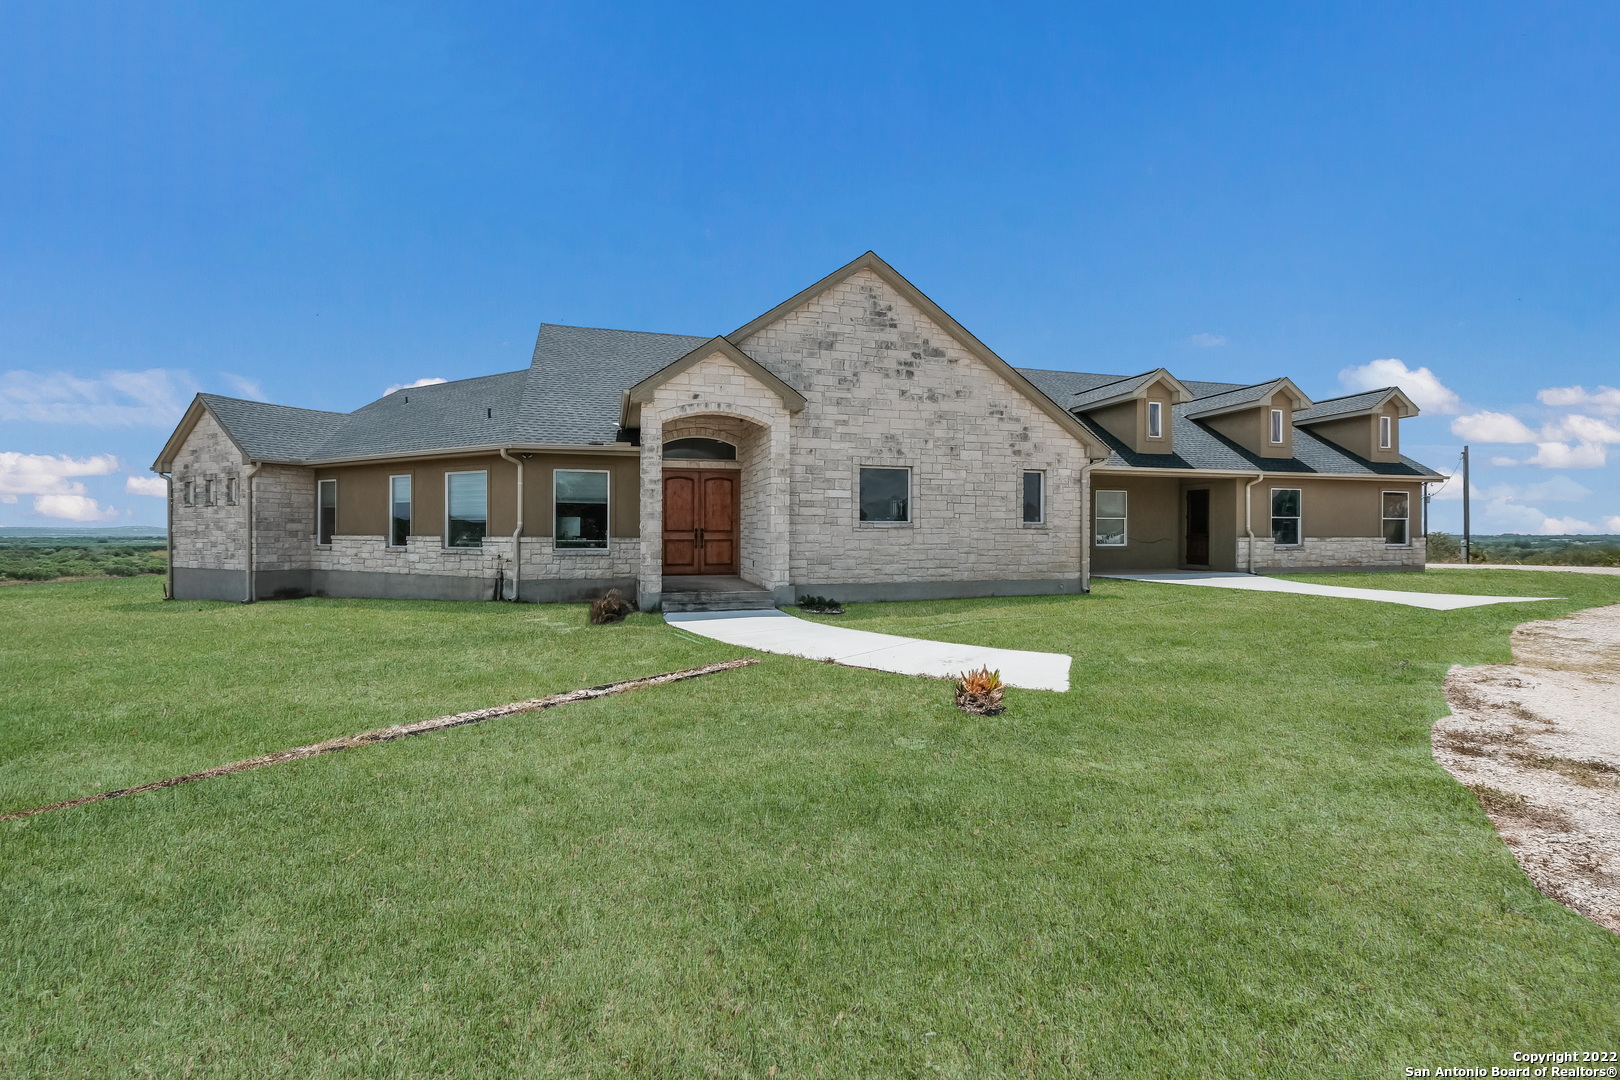 Two Homes on 62 acres and 1/3 interest on 18 river front acres Main House: 4 Bedroom 3.5 Baths with water well Guest House: 3 Bedroom 2 Bath with water well  * 3,000  ft of frontage on the Medina River * Hilltop views * Fertile farmland * Pond * Ag Exemption * County Road frontage * Medina Valley ISD